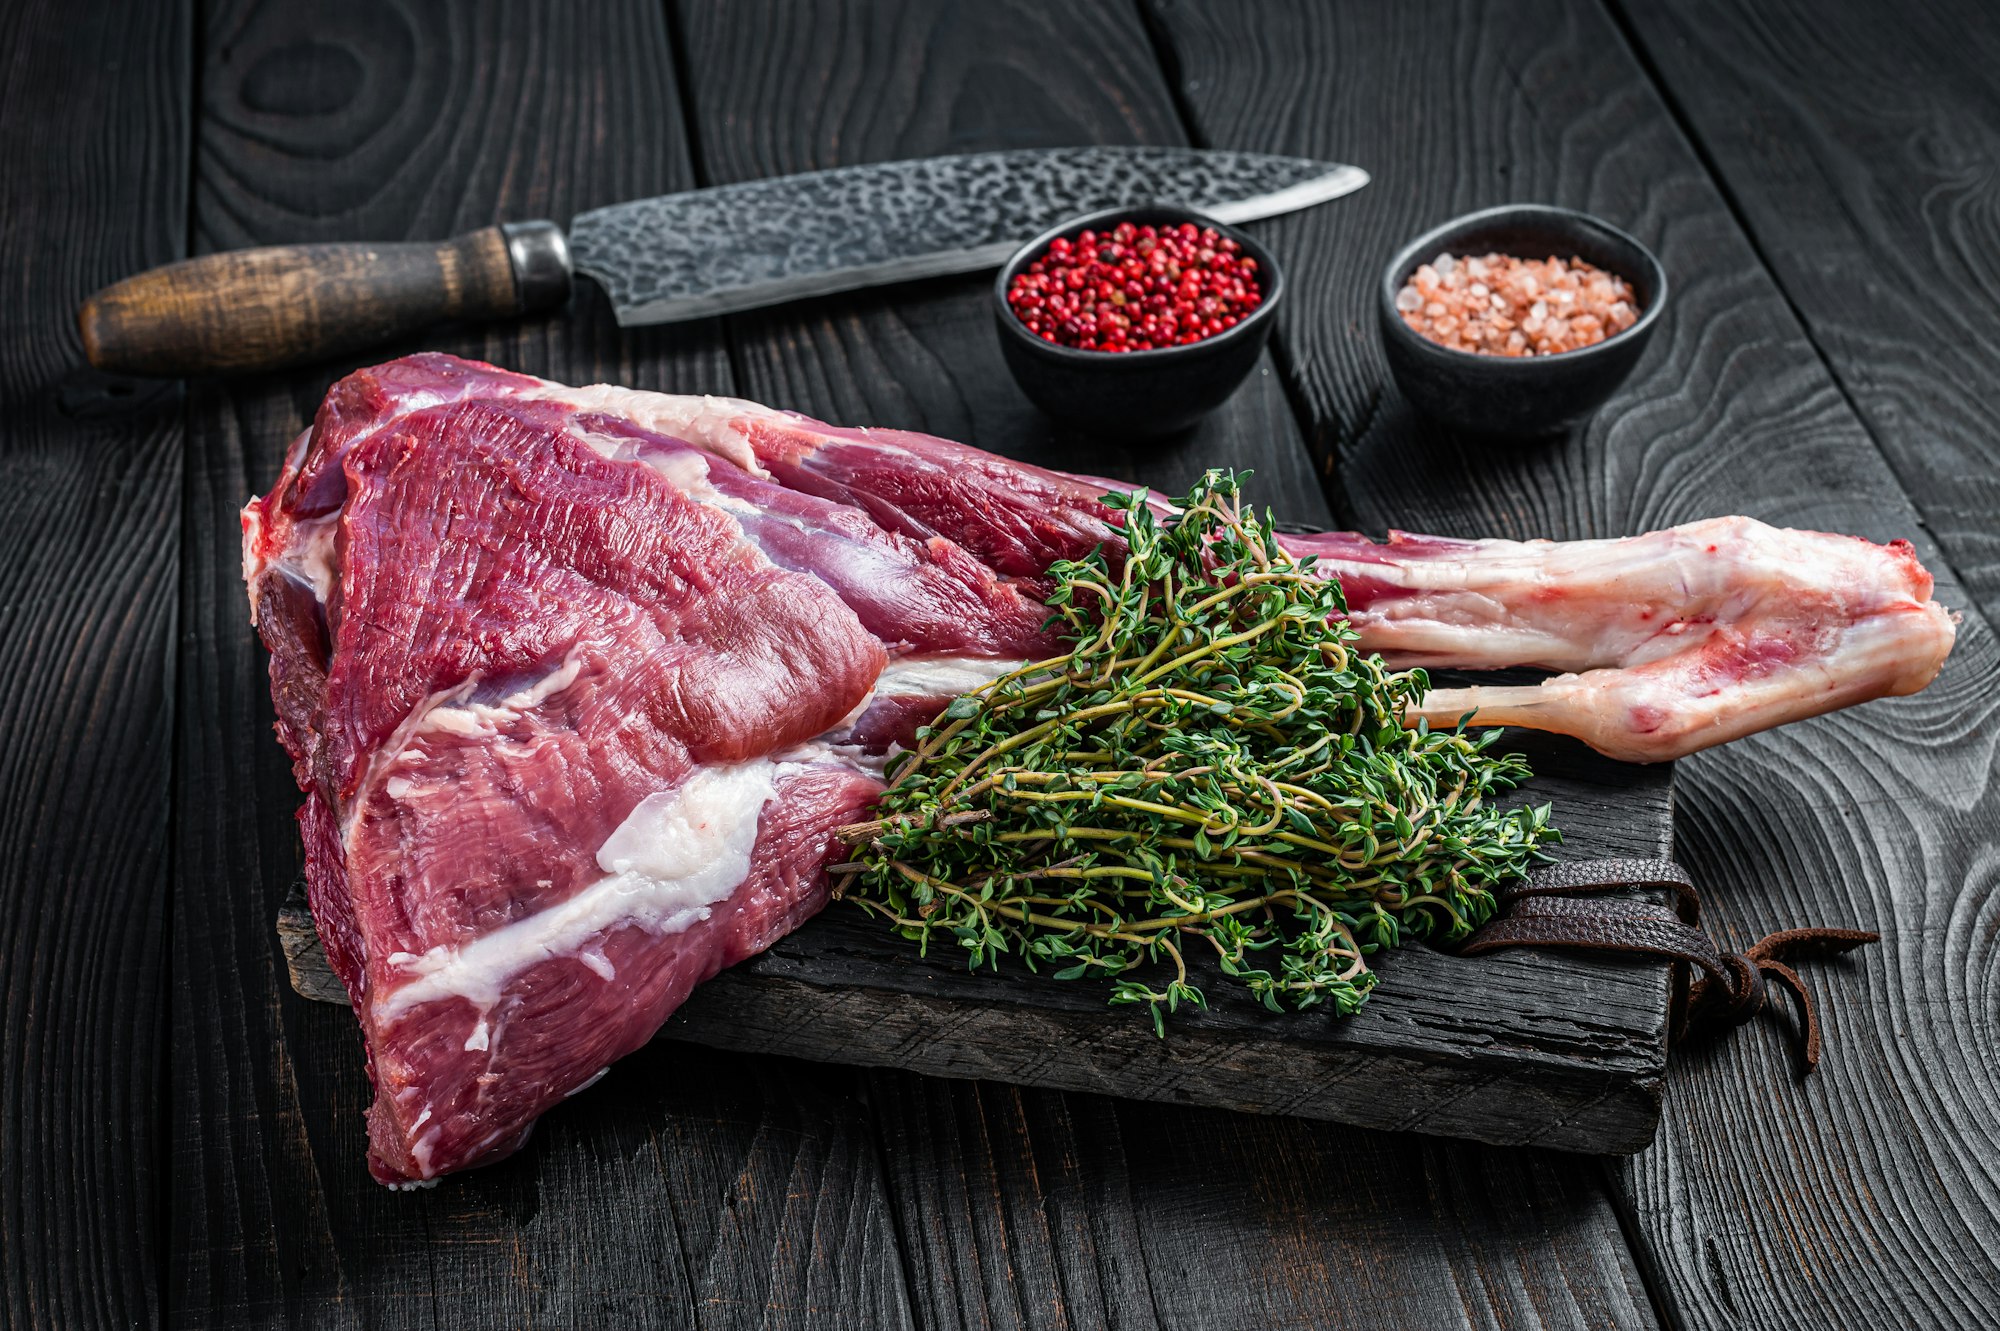 Uncooked Raw goat leg with herbs on butcher cutting board. Black wooden background.